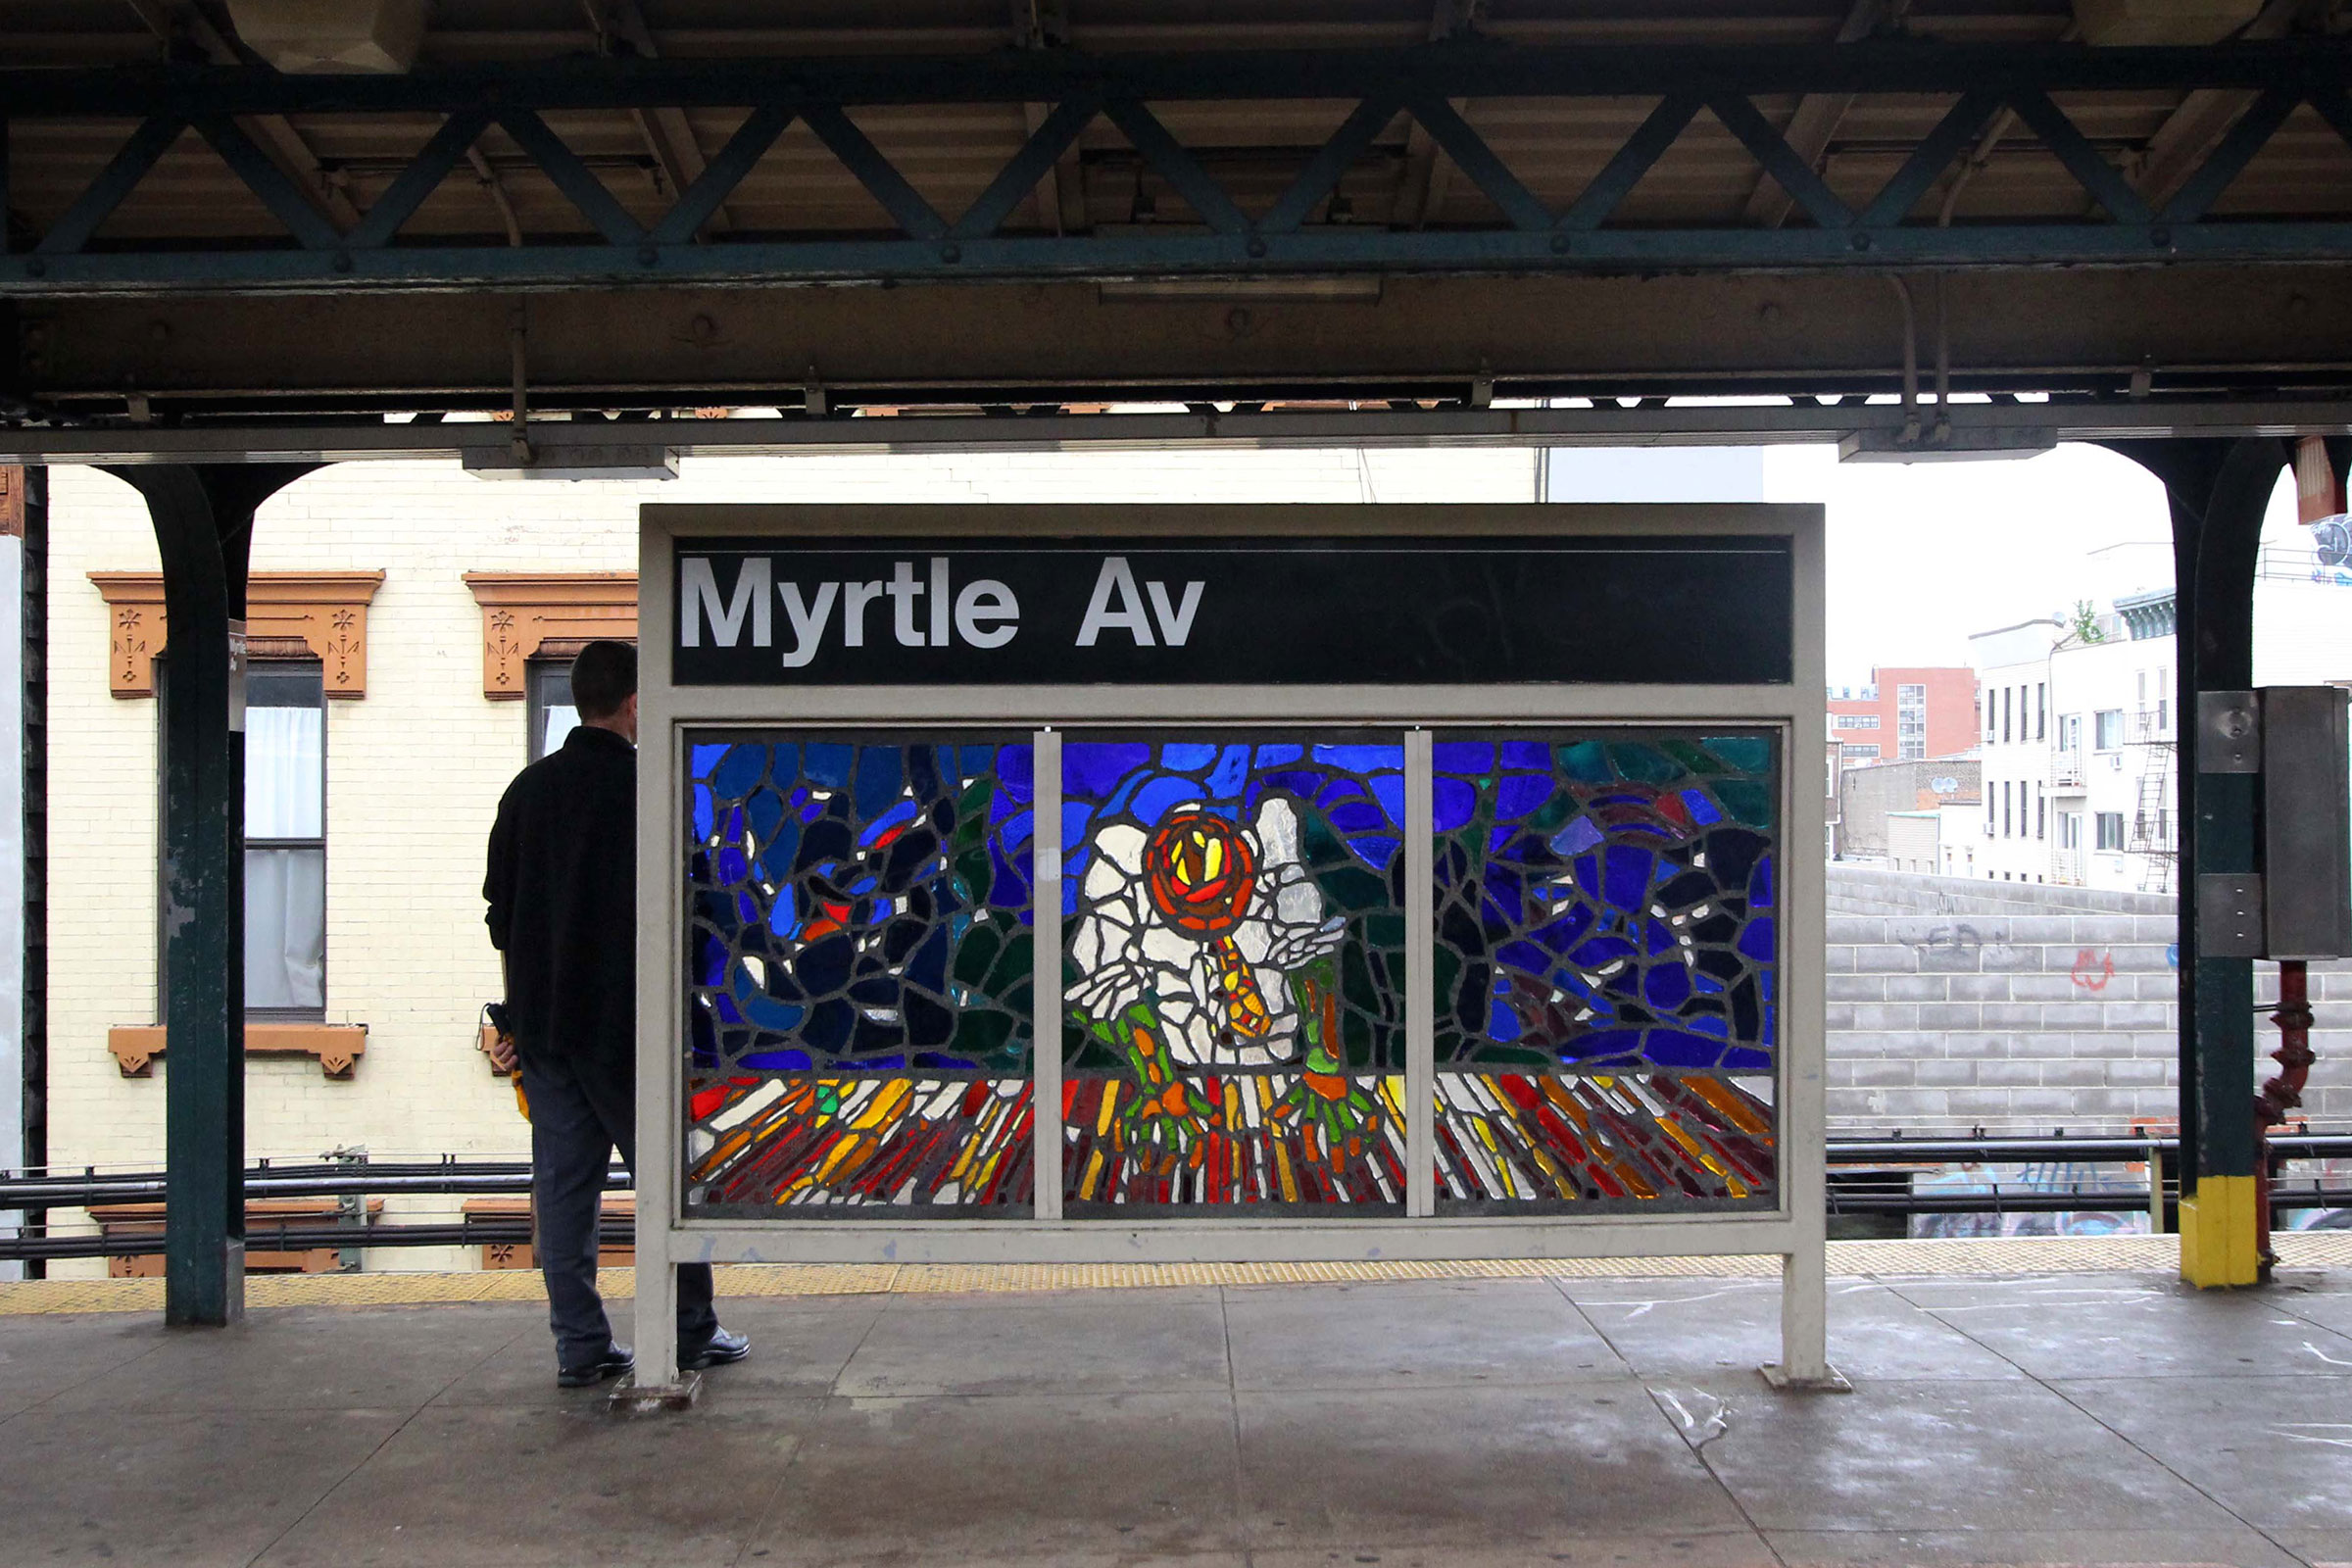 Verna Hart, MFA ’91, “Jammin' Under the EL” (1999) in the Myrtle Avenue (J/M/Z) station (photo by ShellyS/Flickr)